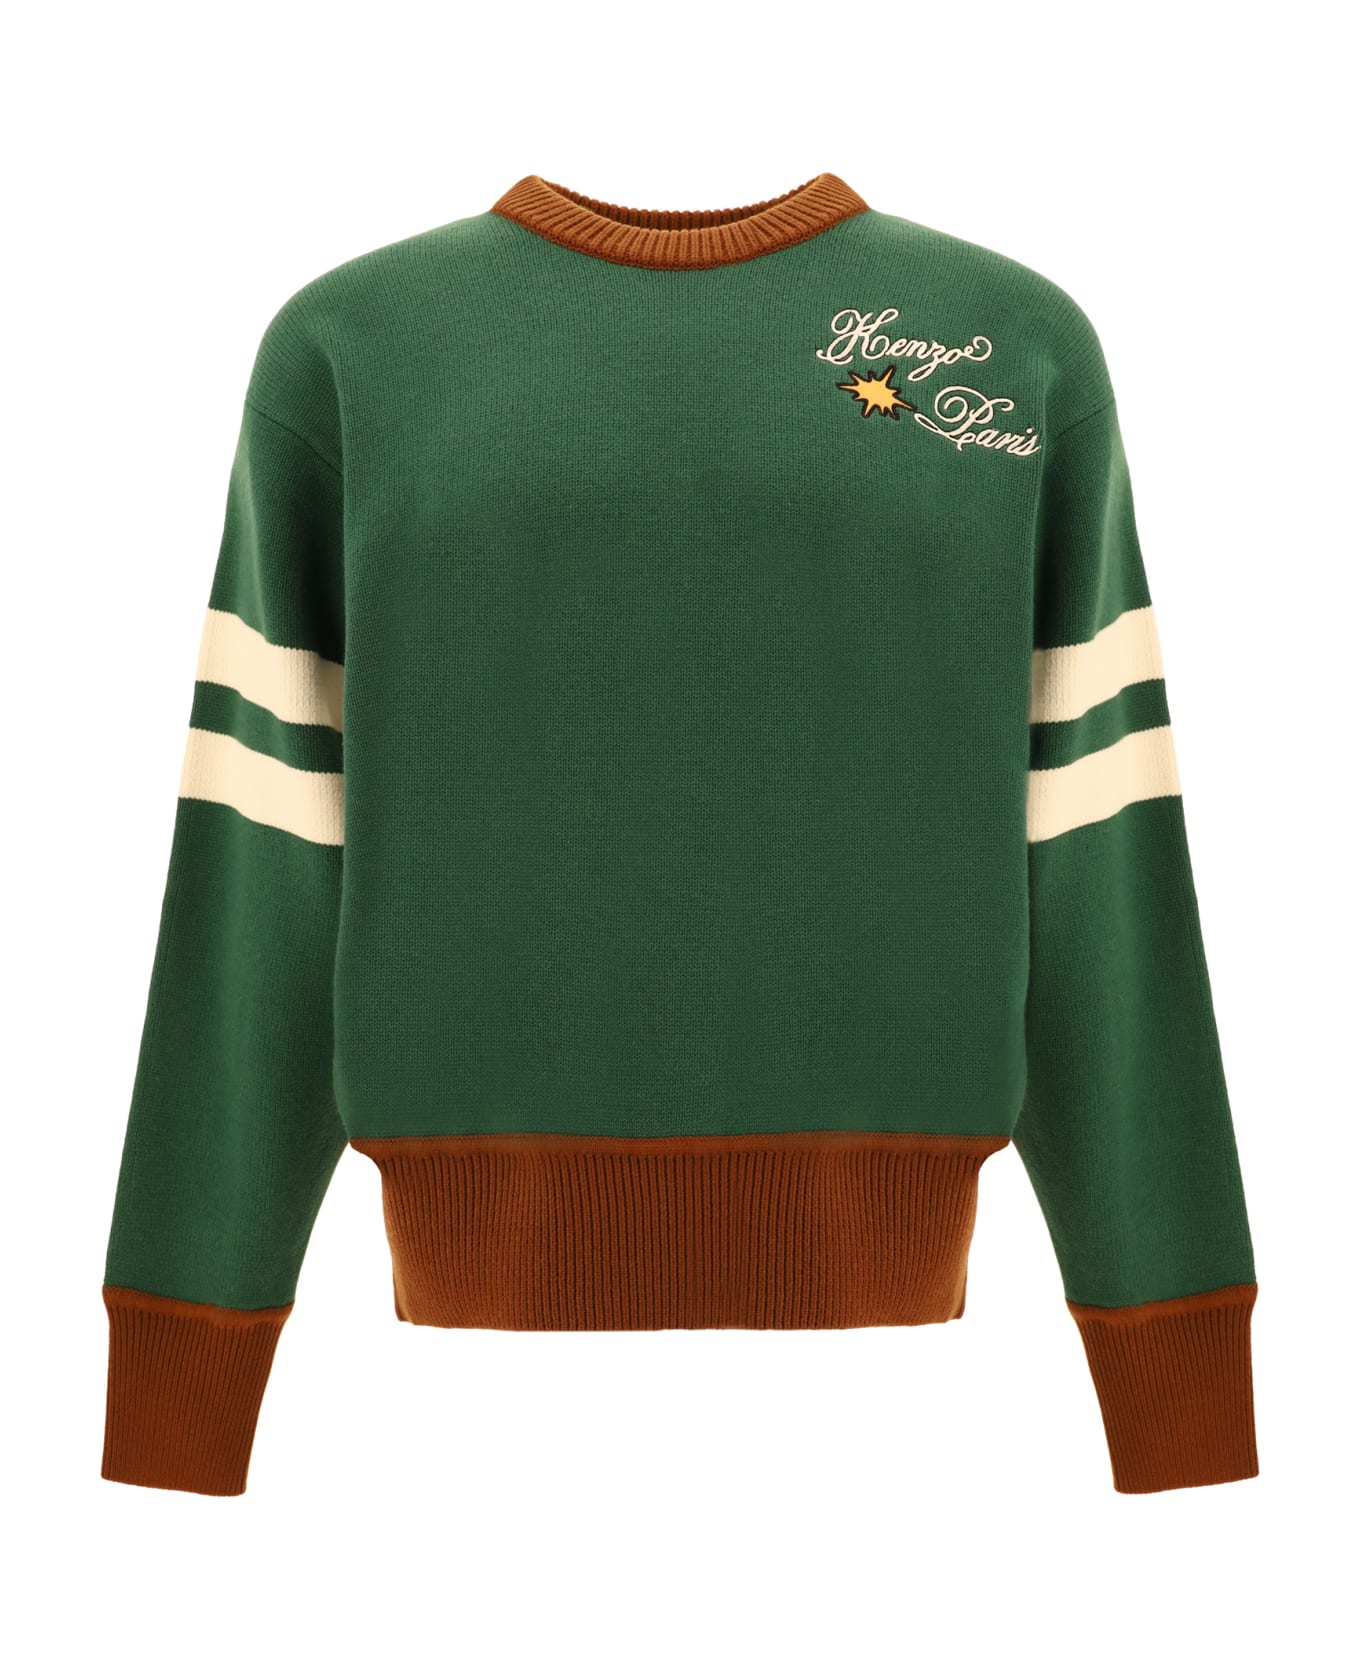 Kenzo Party Sweater - Sapin